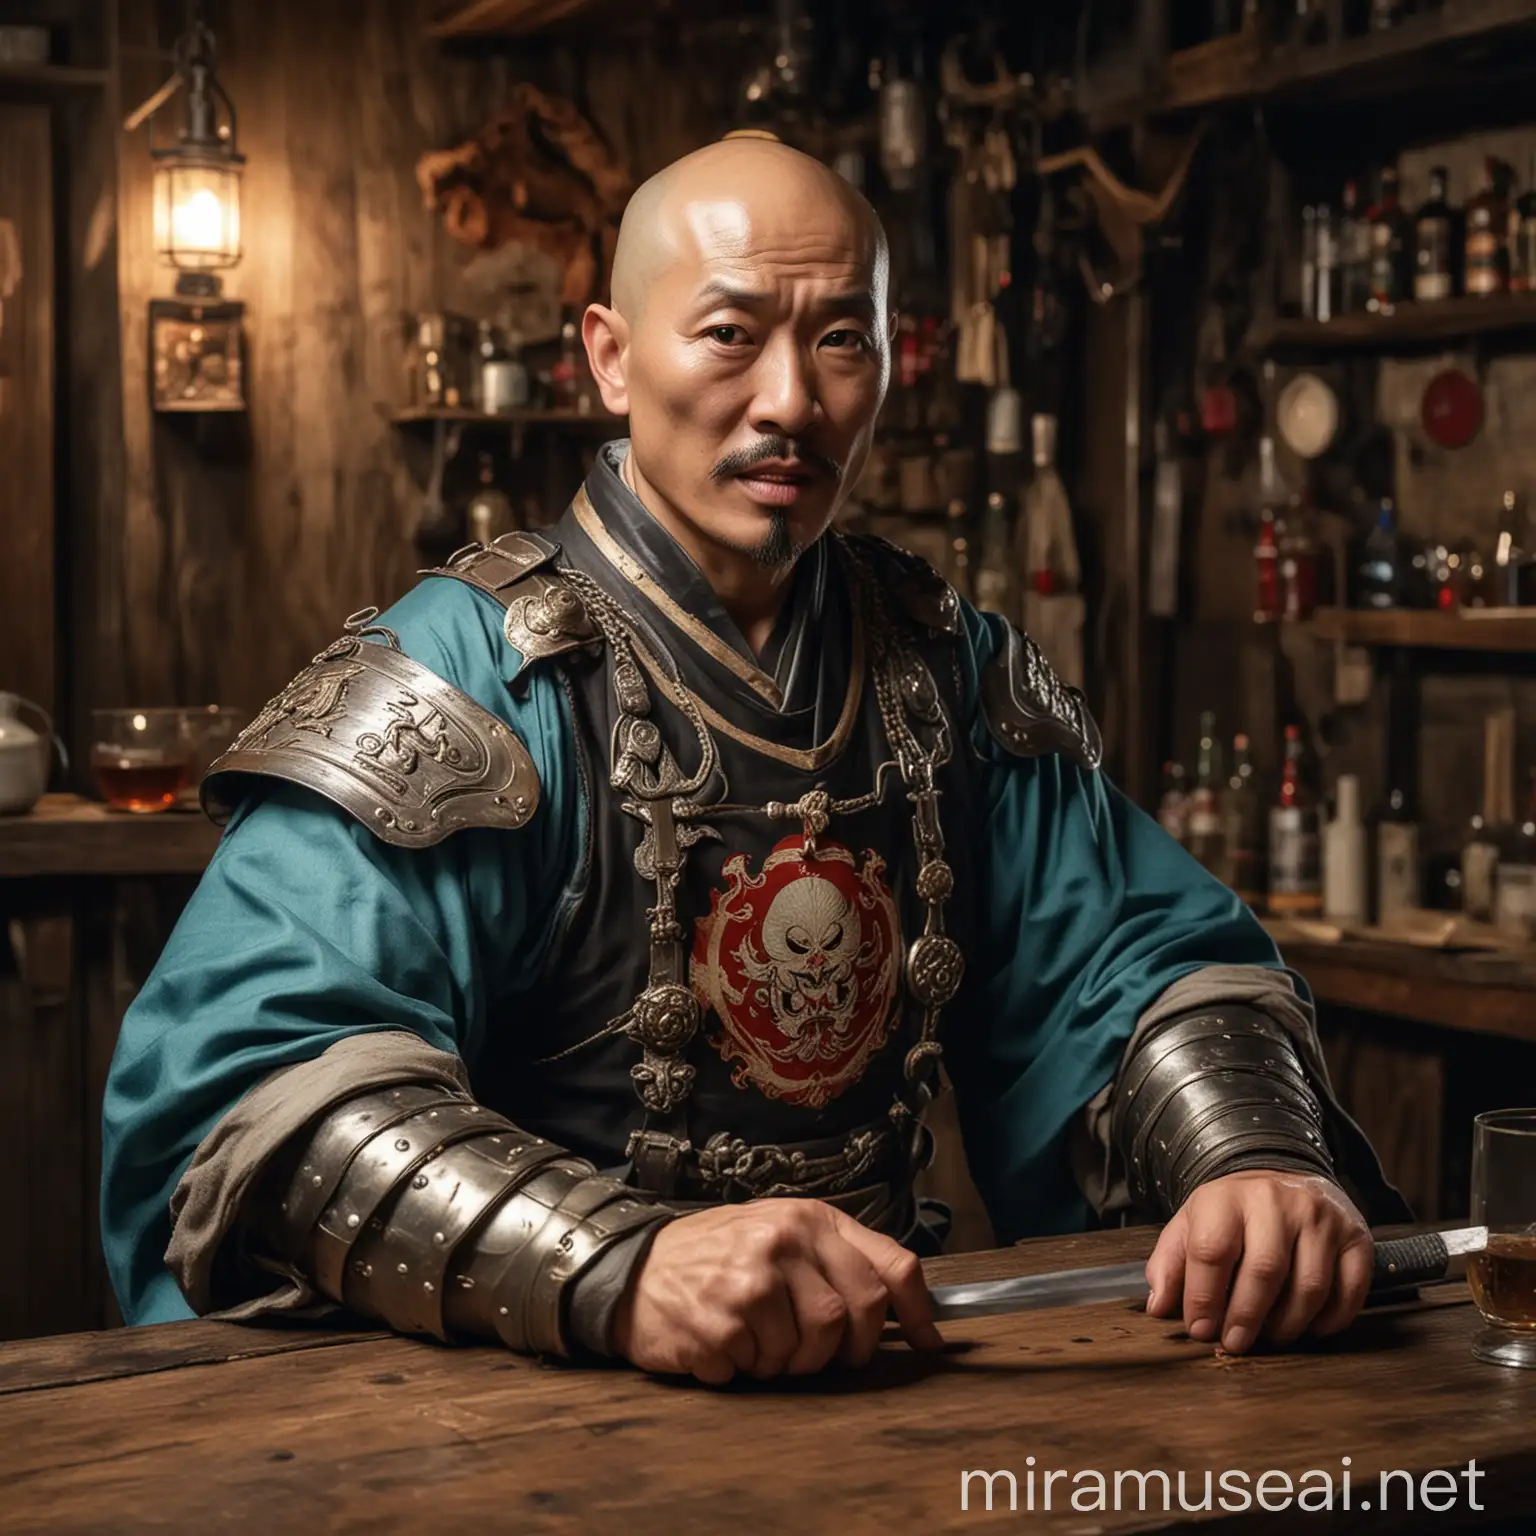 Fool mid age semi-bald Chinese paladin with sword and shield looking ridicoulus in a tavern drinking moonshine